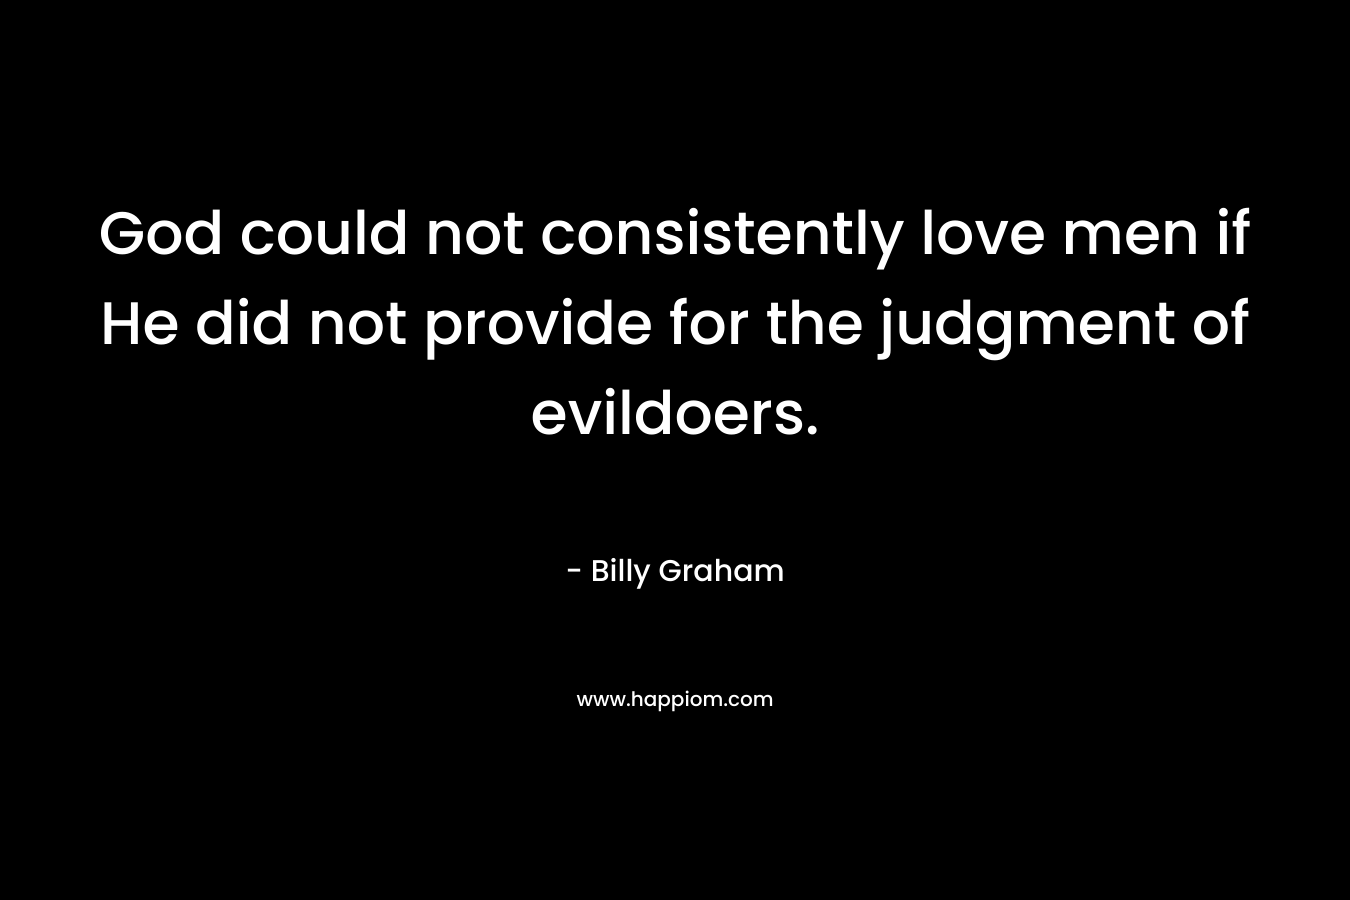 God could not consistently love men if He did not provide for the judgment of evildoers. – Billy Graham